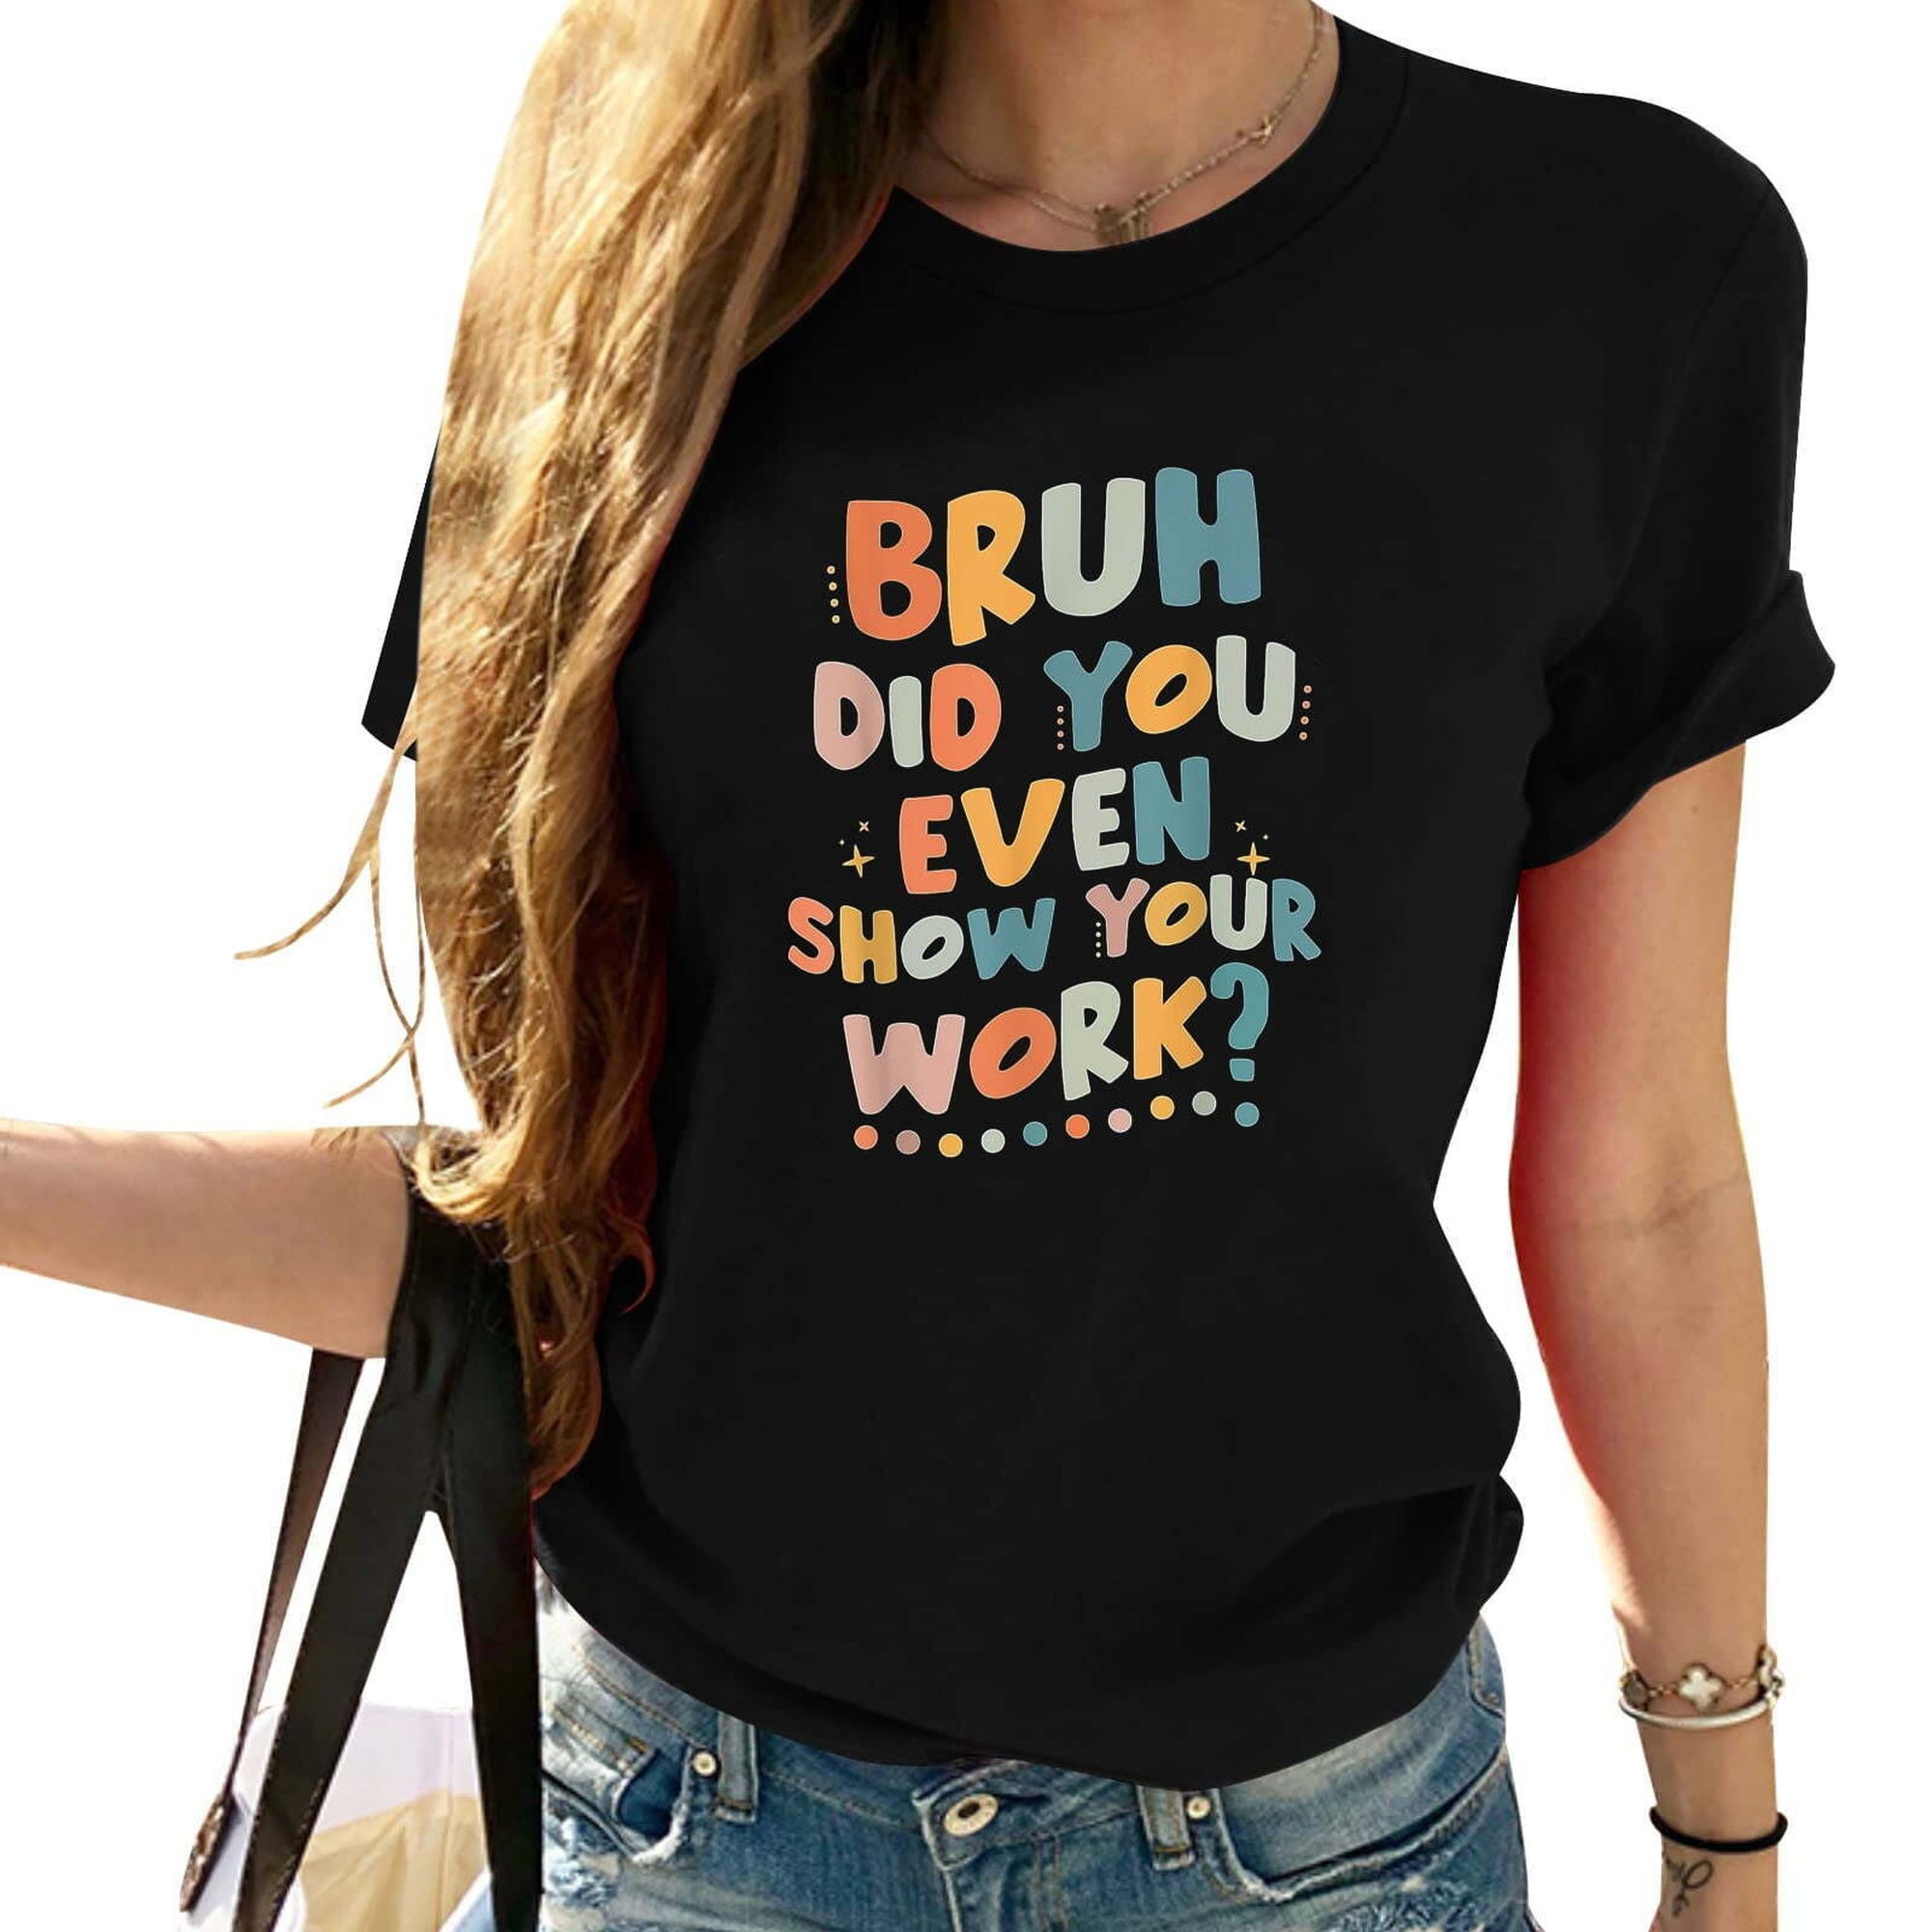 Funny Math Teacher Show Your Work T-Shirt - Hilarious and Groovy Design ...